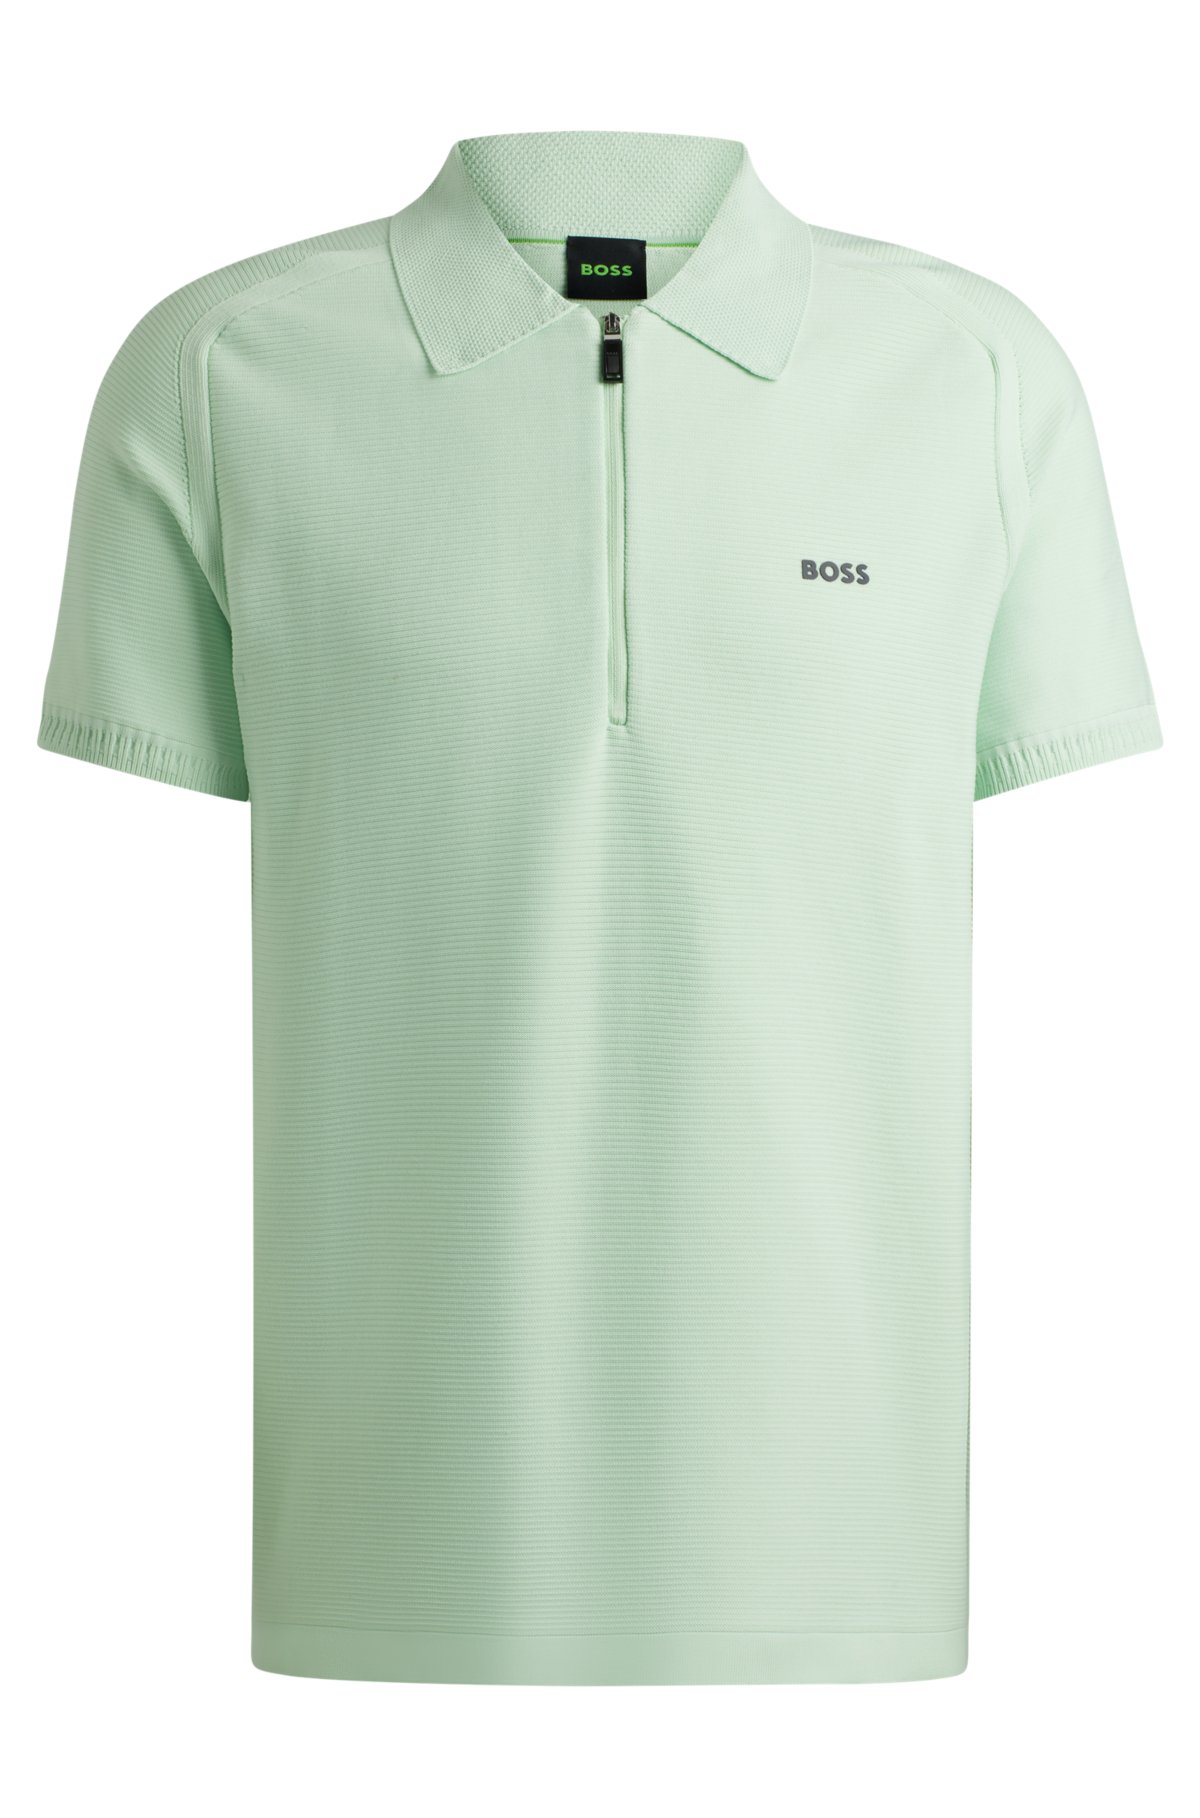 Short-sleeved zip-neck polo sweater with logo detail, Light Green